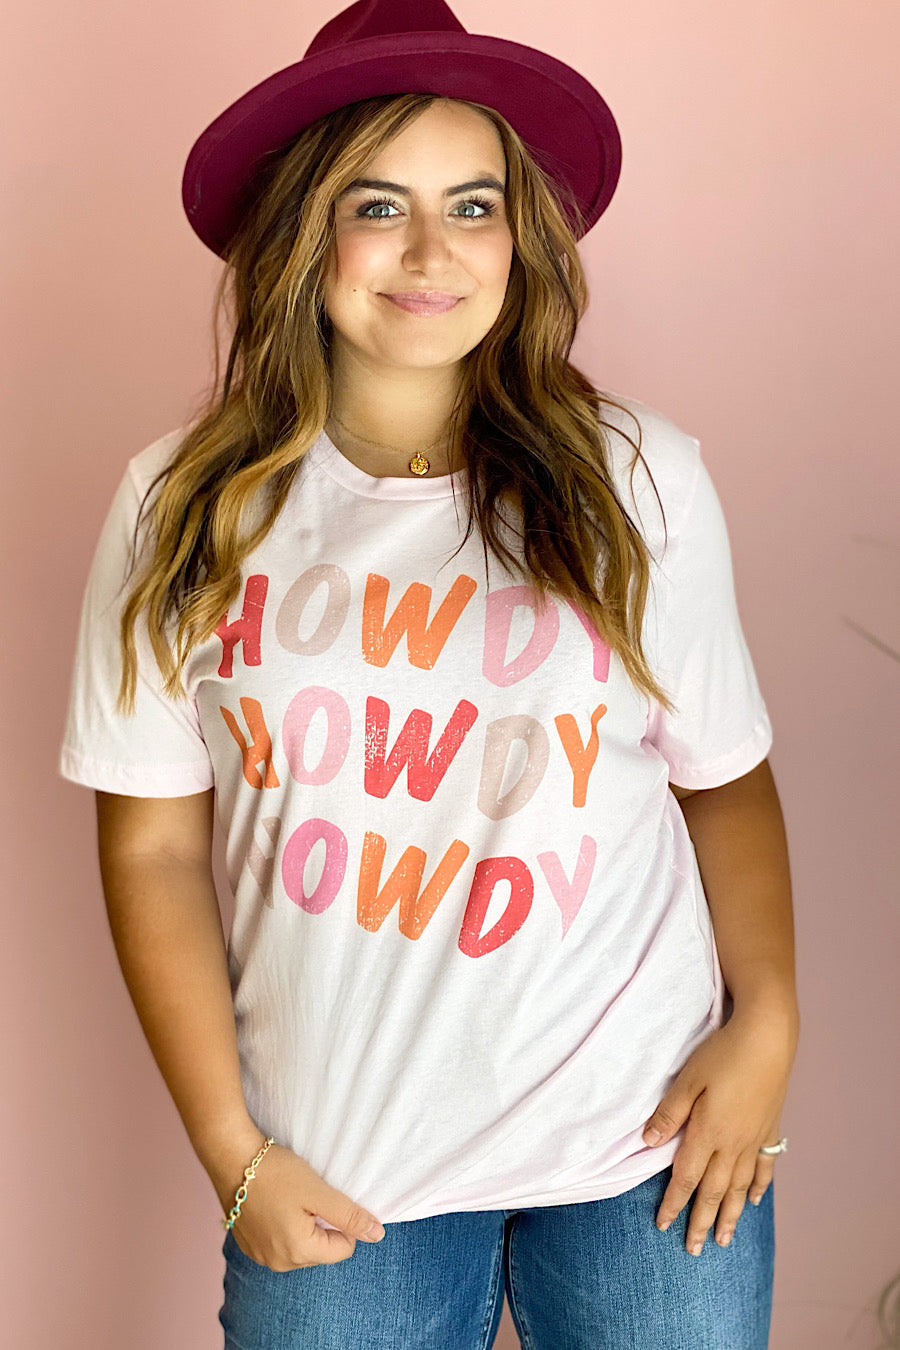 Howdy Howdy Howdy Graphic T-Shirt